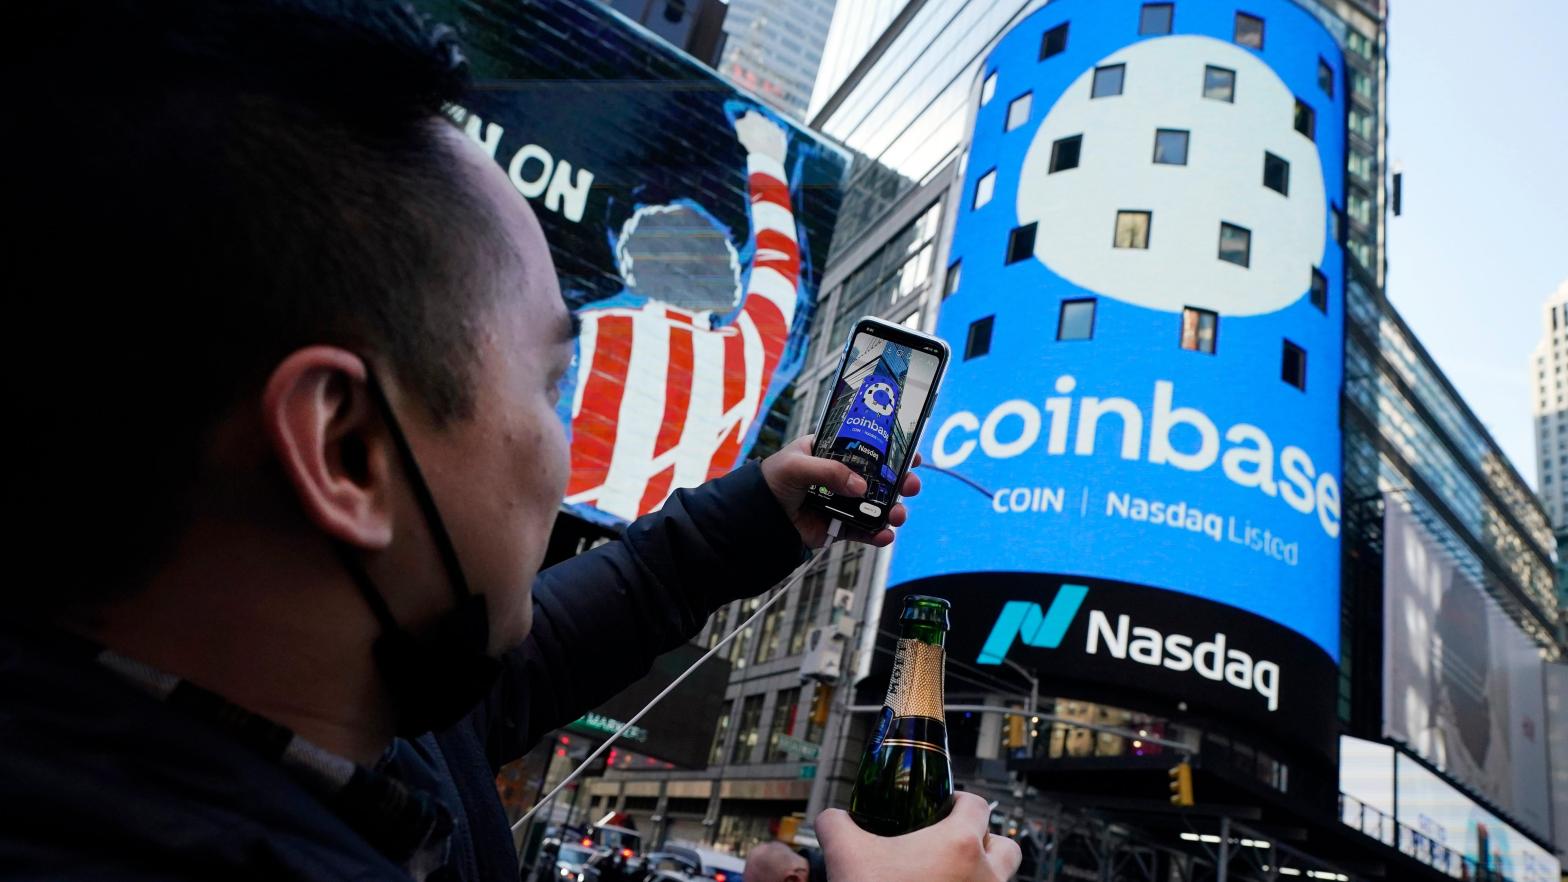 Coinbase was hot stuff back in 2021 during a rise in global crypto prices. Around this same time, product manager Ishan Wahi was involved in an insider trading scheme to make money off new coin listings. (Photo: Richard Drew, AP)